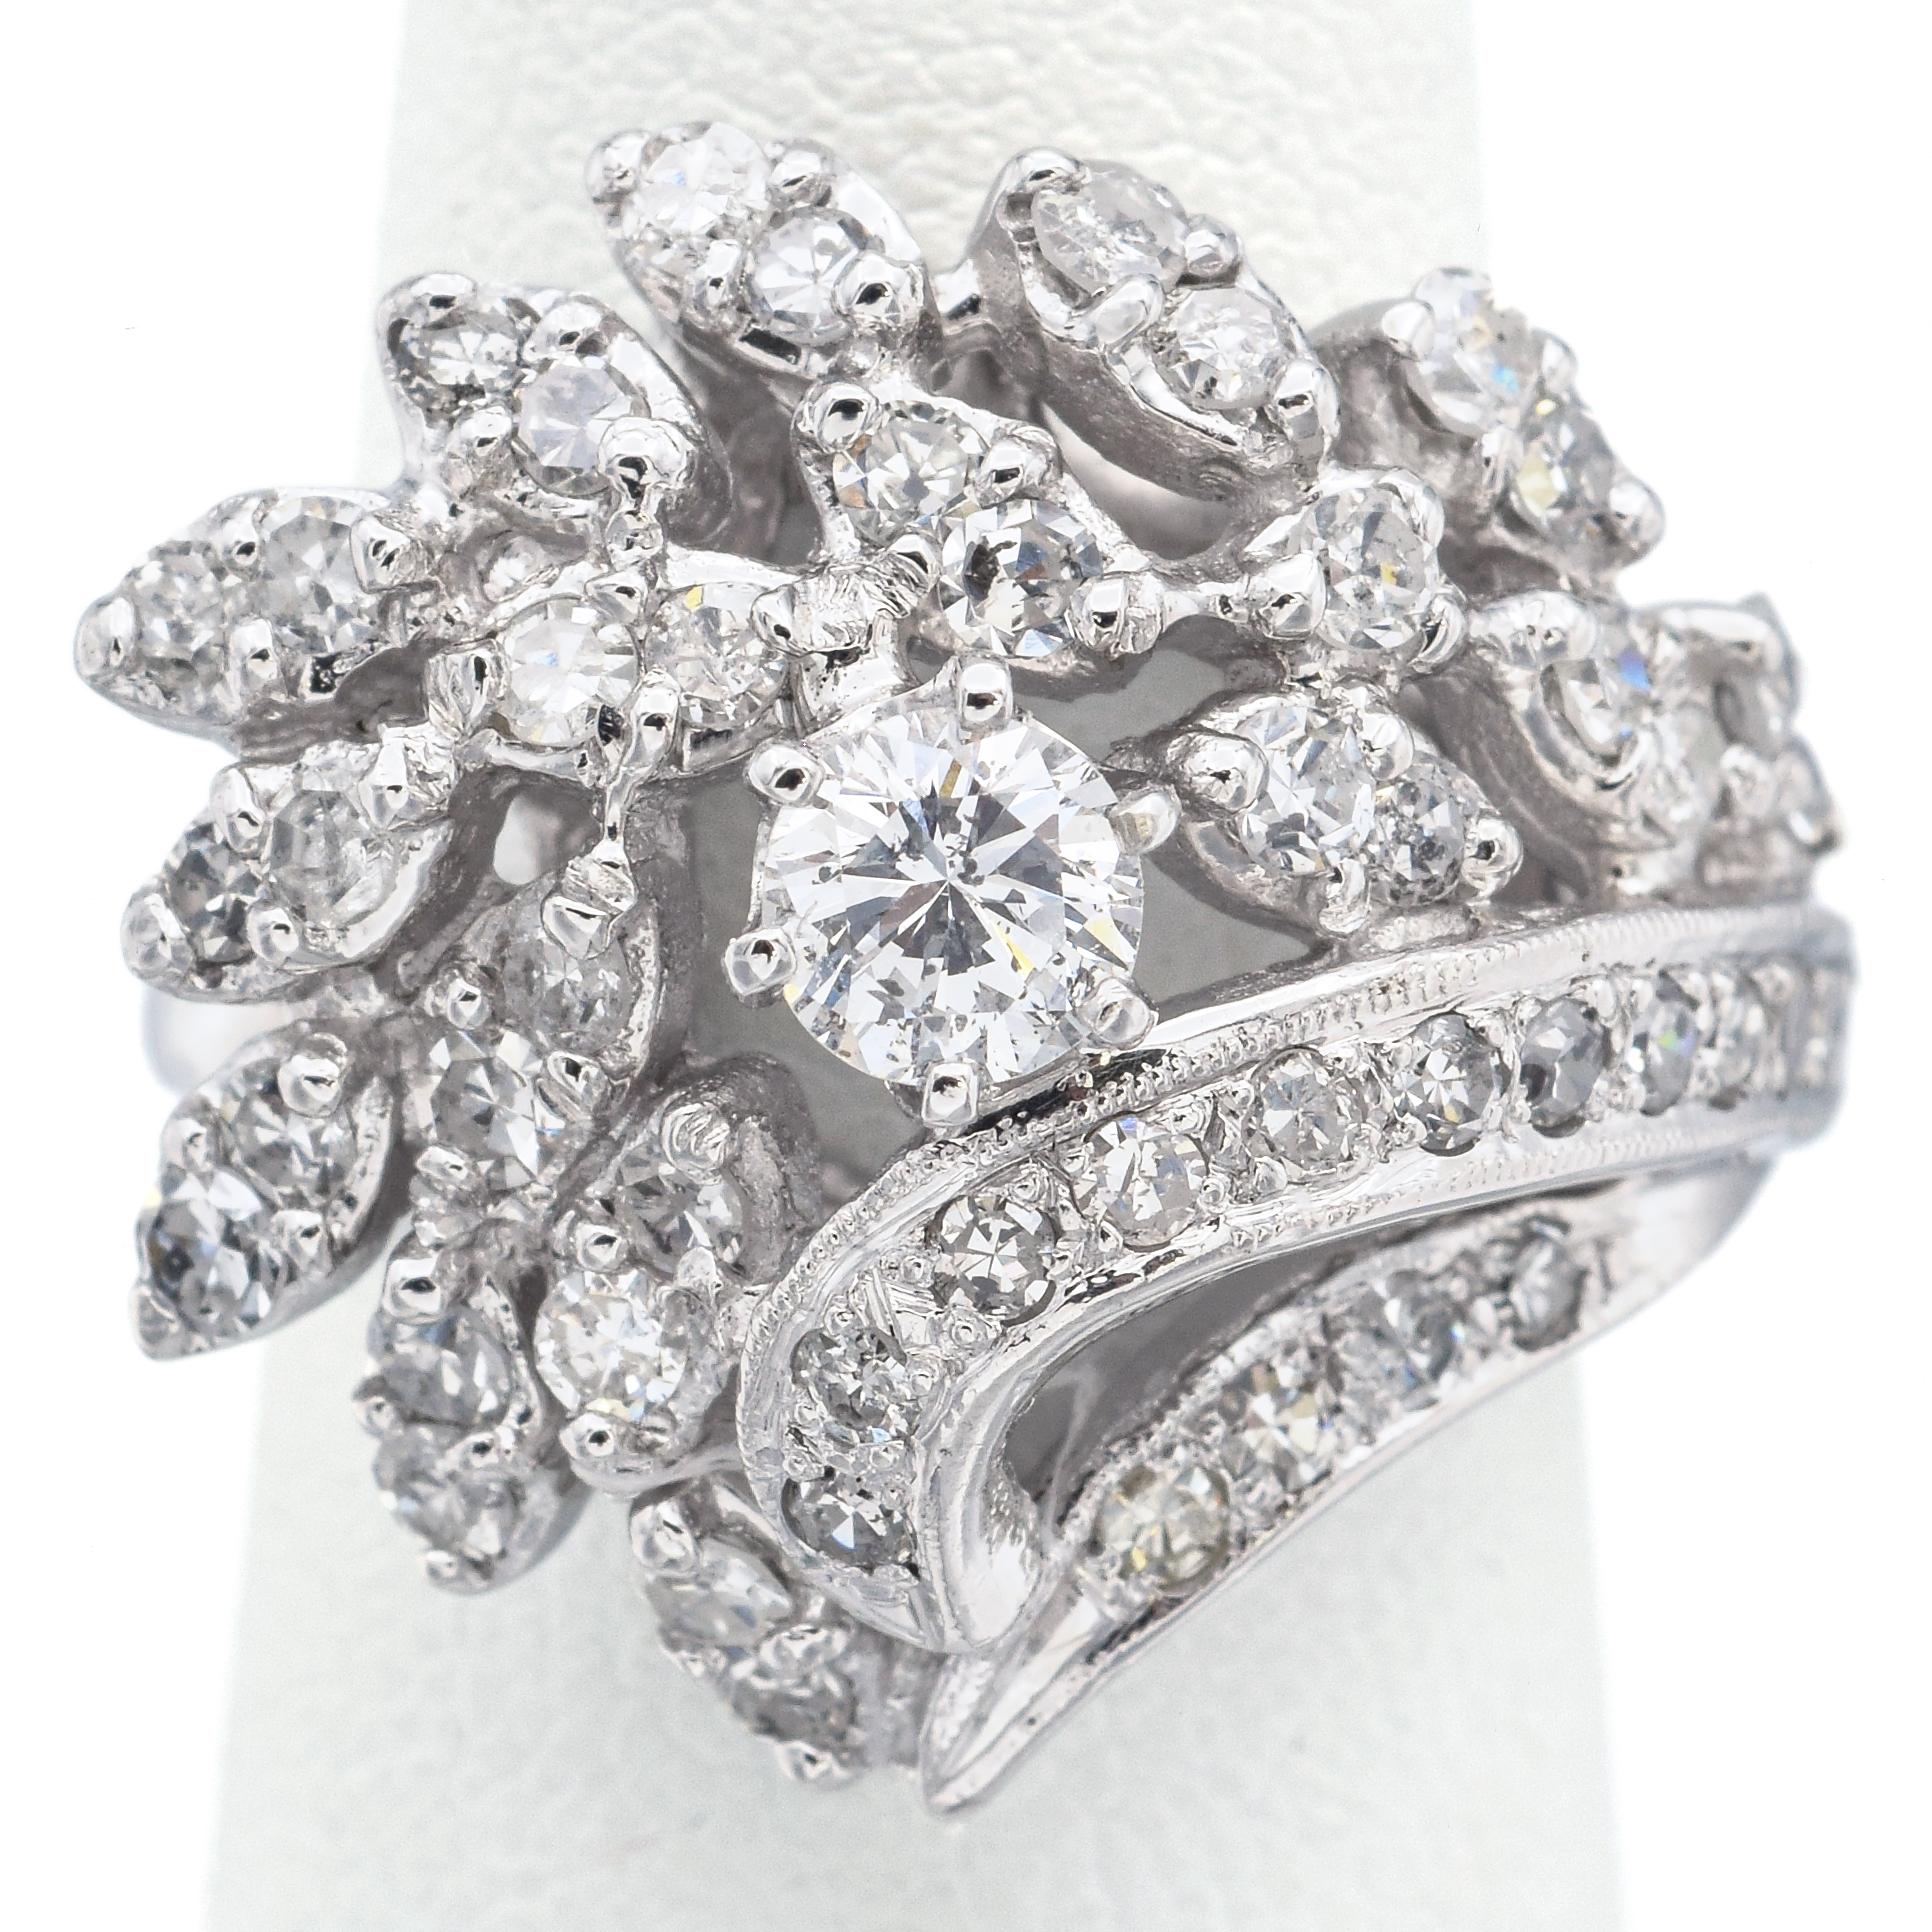 Weight: 8.6 Grams
Stone: Approx 1.65 TCW (0.36 ct center & 0.02-0.03 side) H/J SI-I Diamonds
Face of Ring: 23.0 x 21.0 x 11.2 mm
Size: 5
Hallmark: 14K

ITEM #: BR-1056-092123-13
